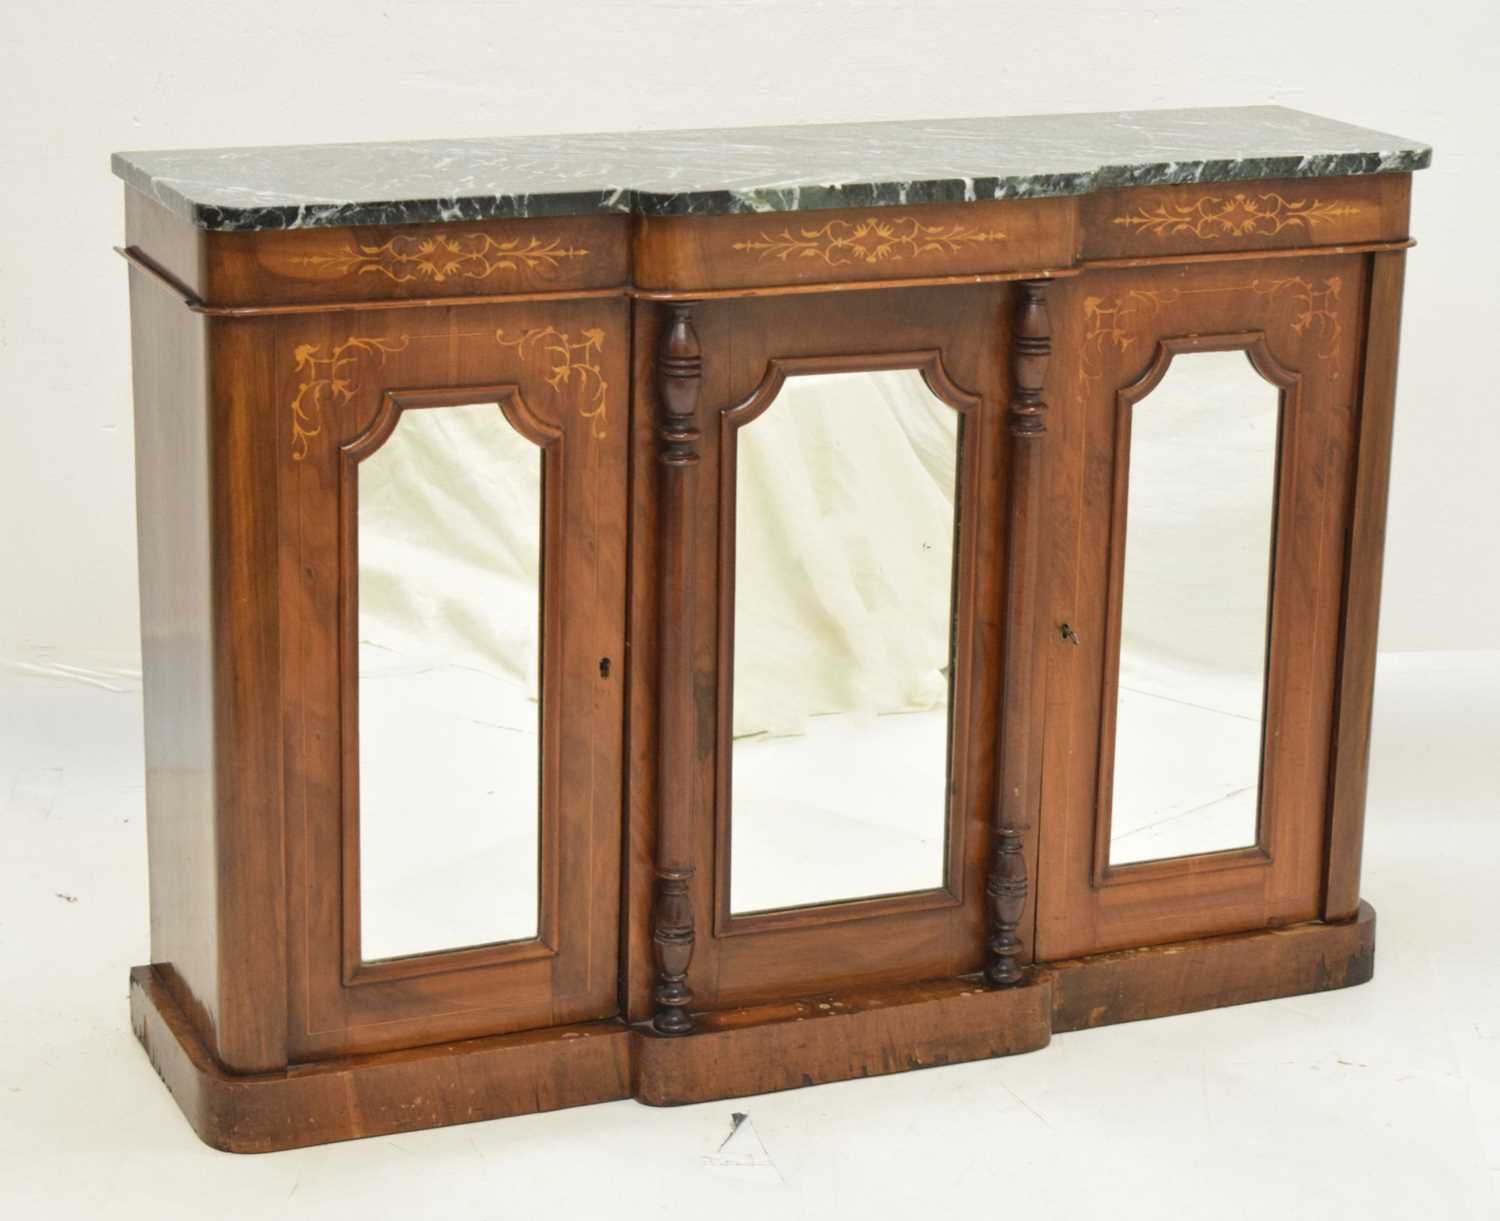 19th century inlaid walnut breakfront credenza or side cabinet with marble top